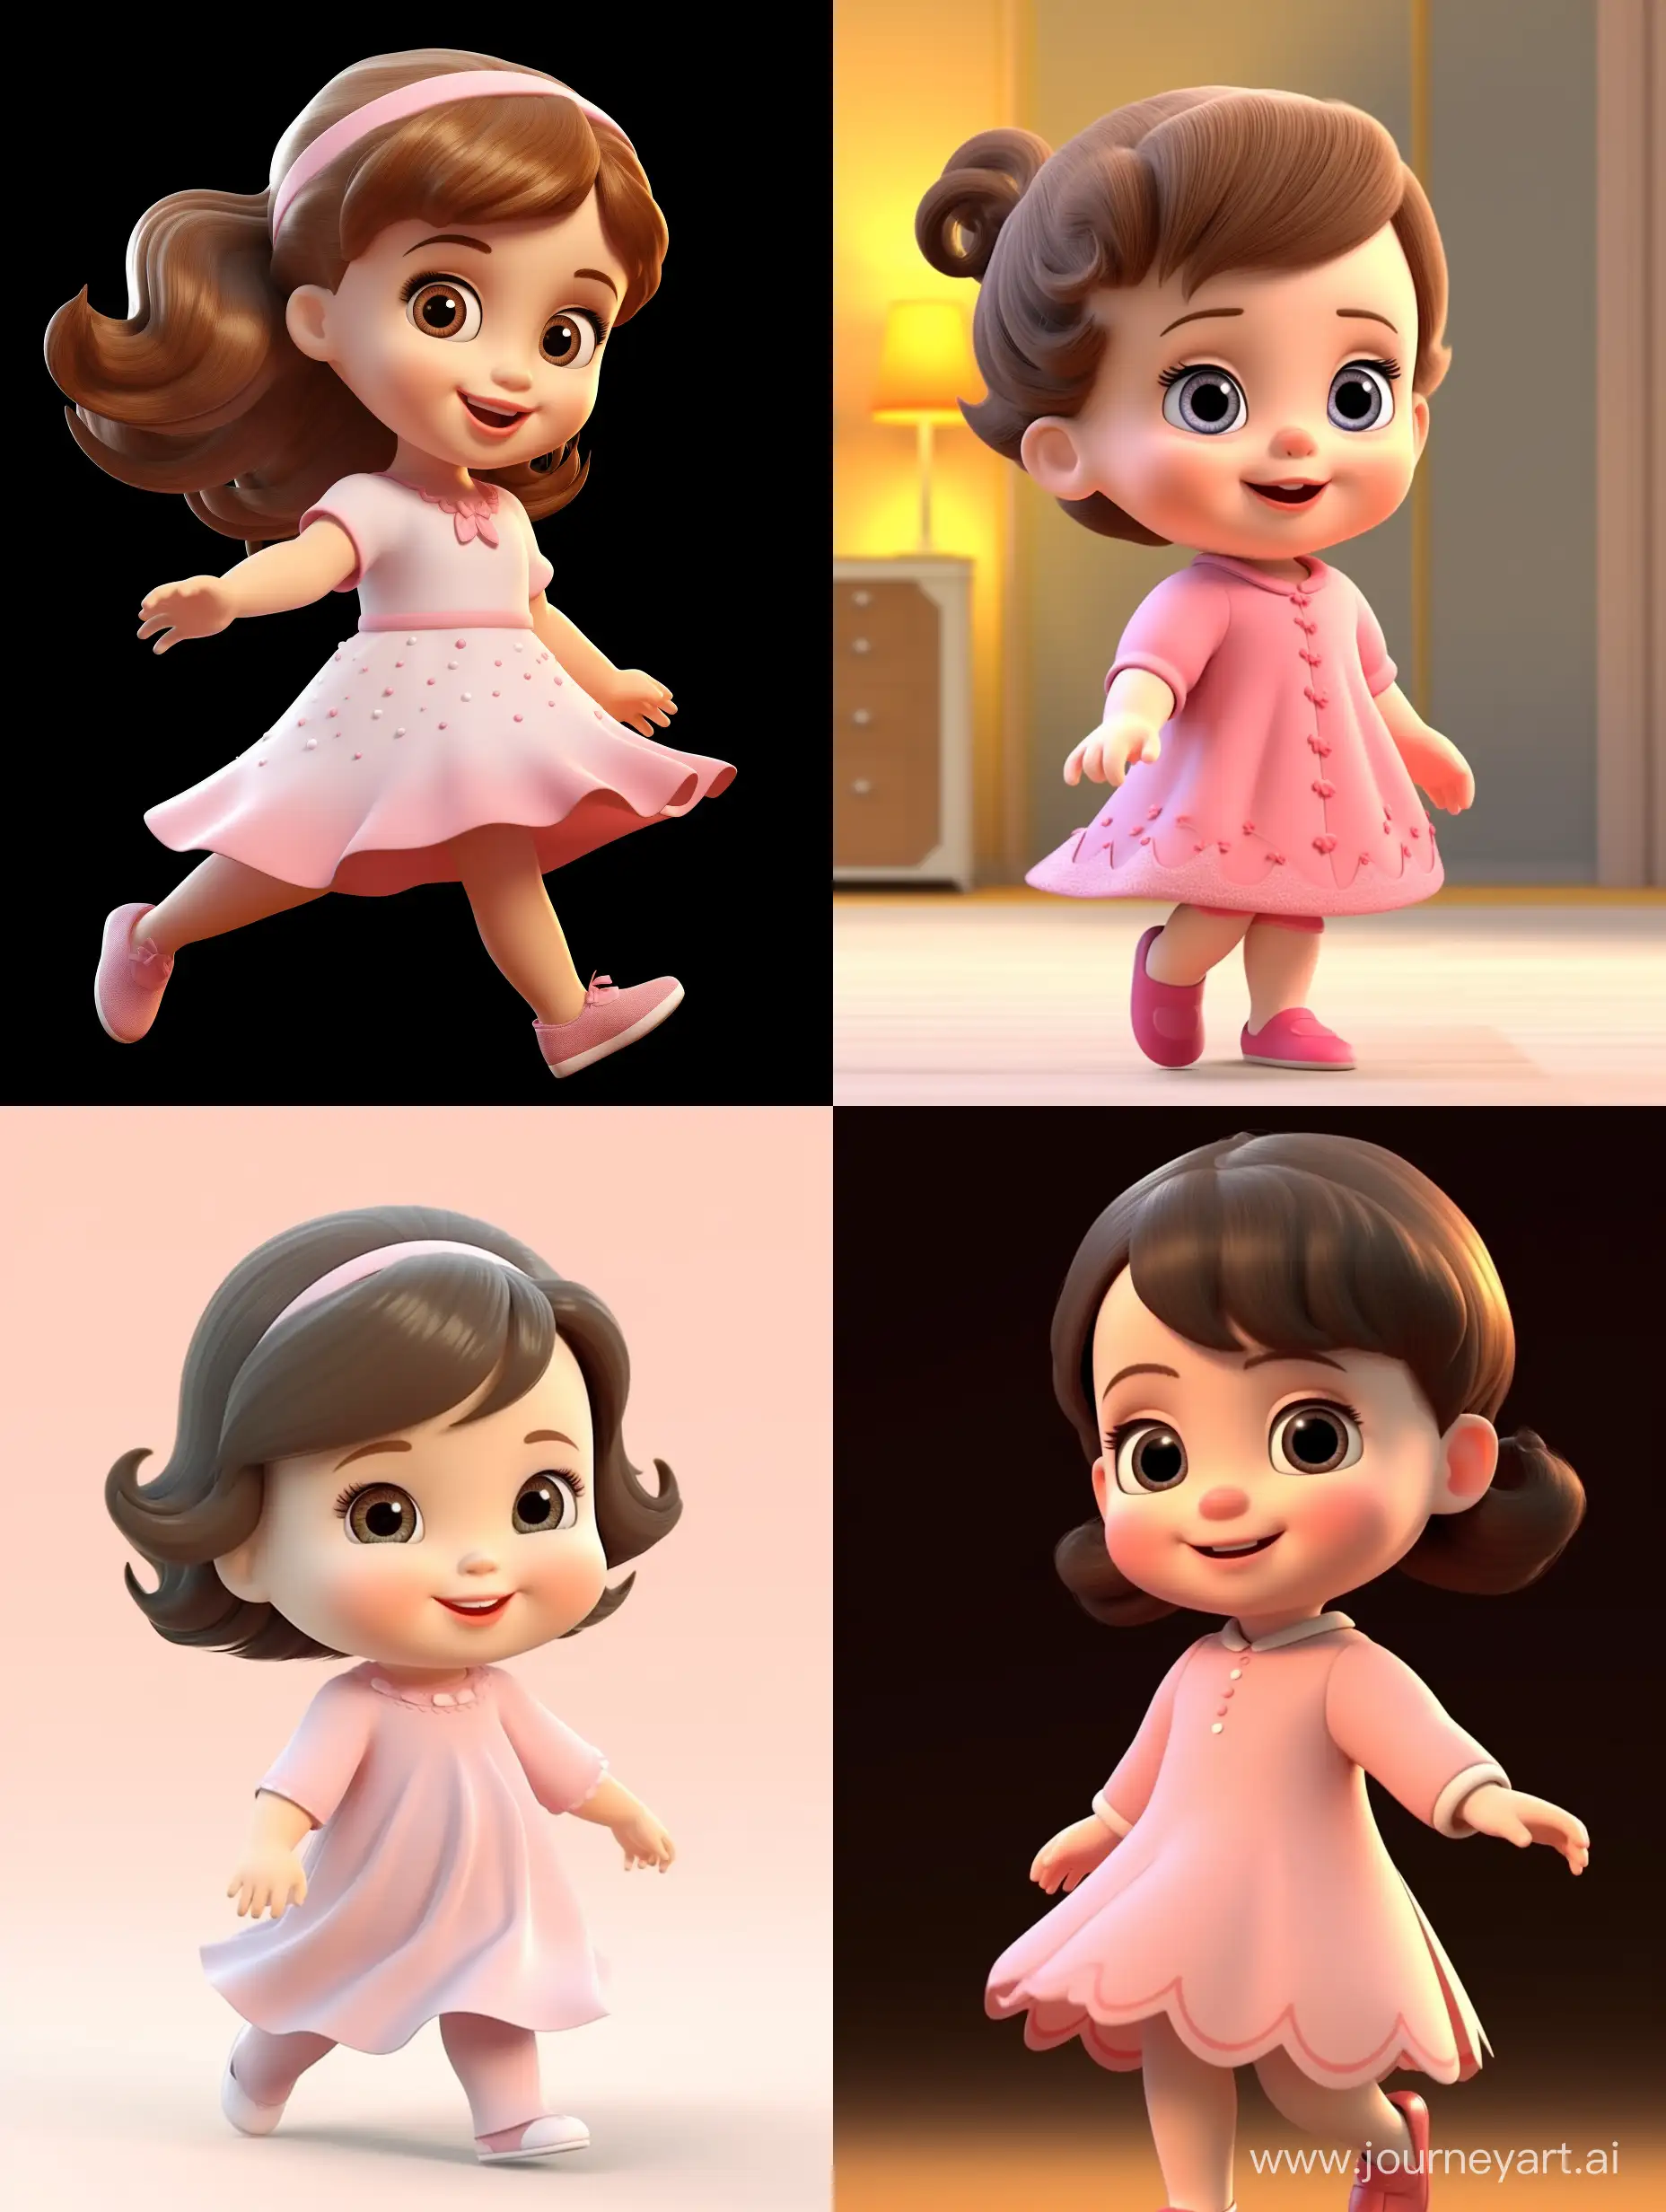 Enchanting-3D-Animation-Adorable-Baby-in-Magical-Pink-Dress